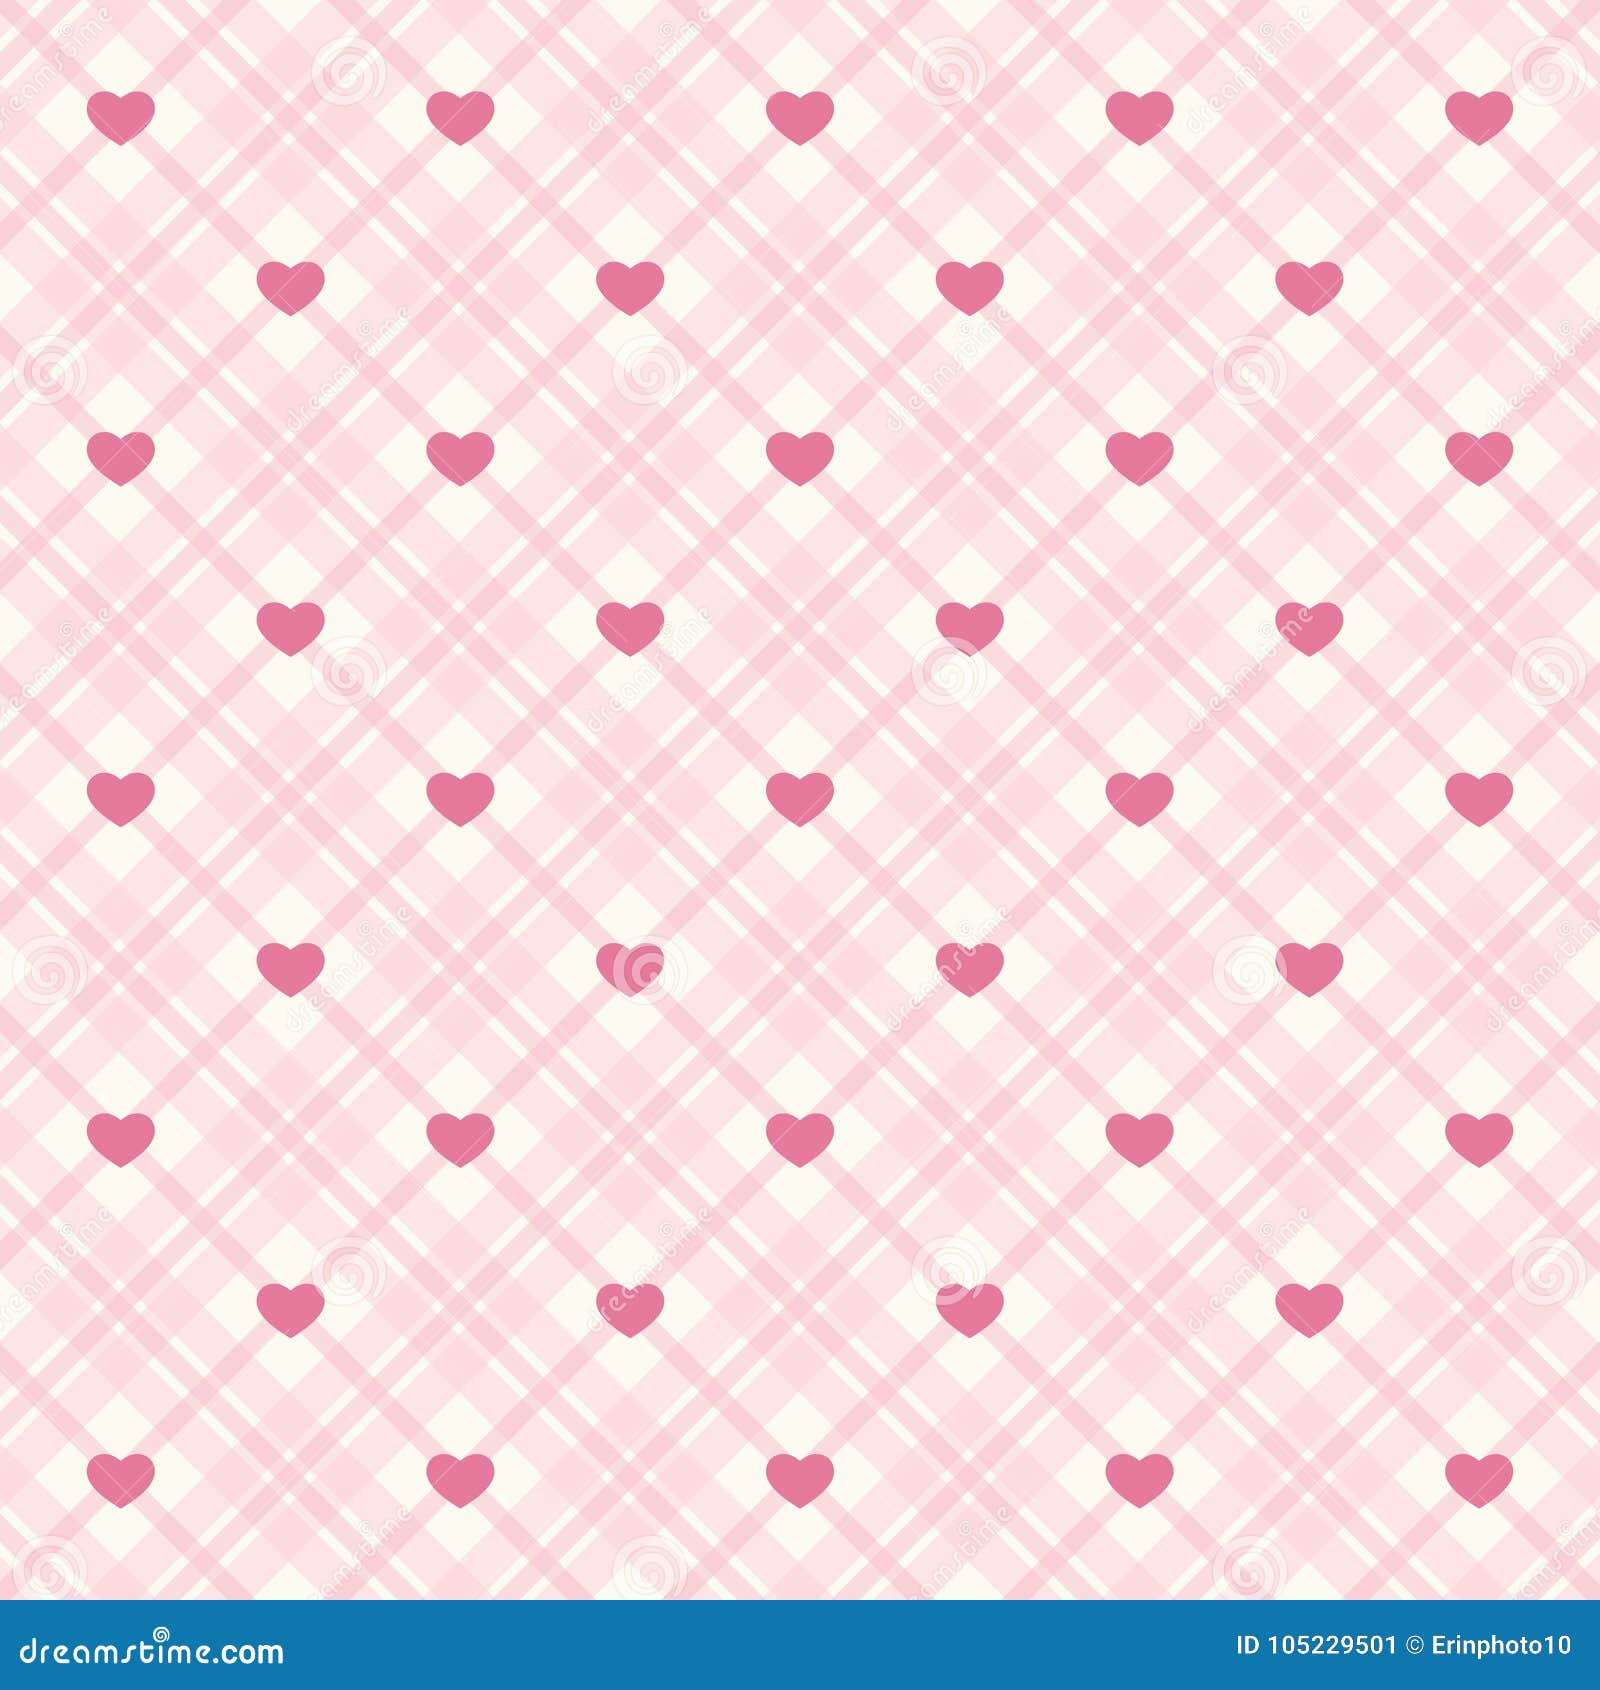 Cute Primitive Retro Pattern with Small Hearts on Plaid Background ...